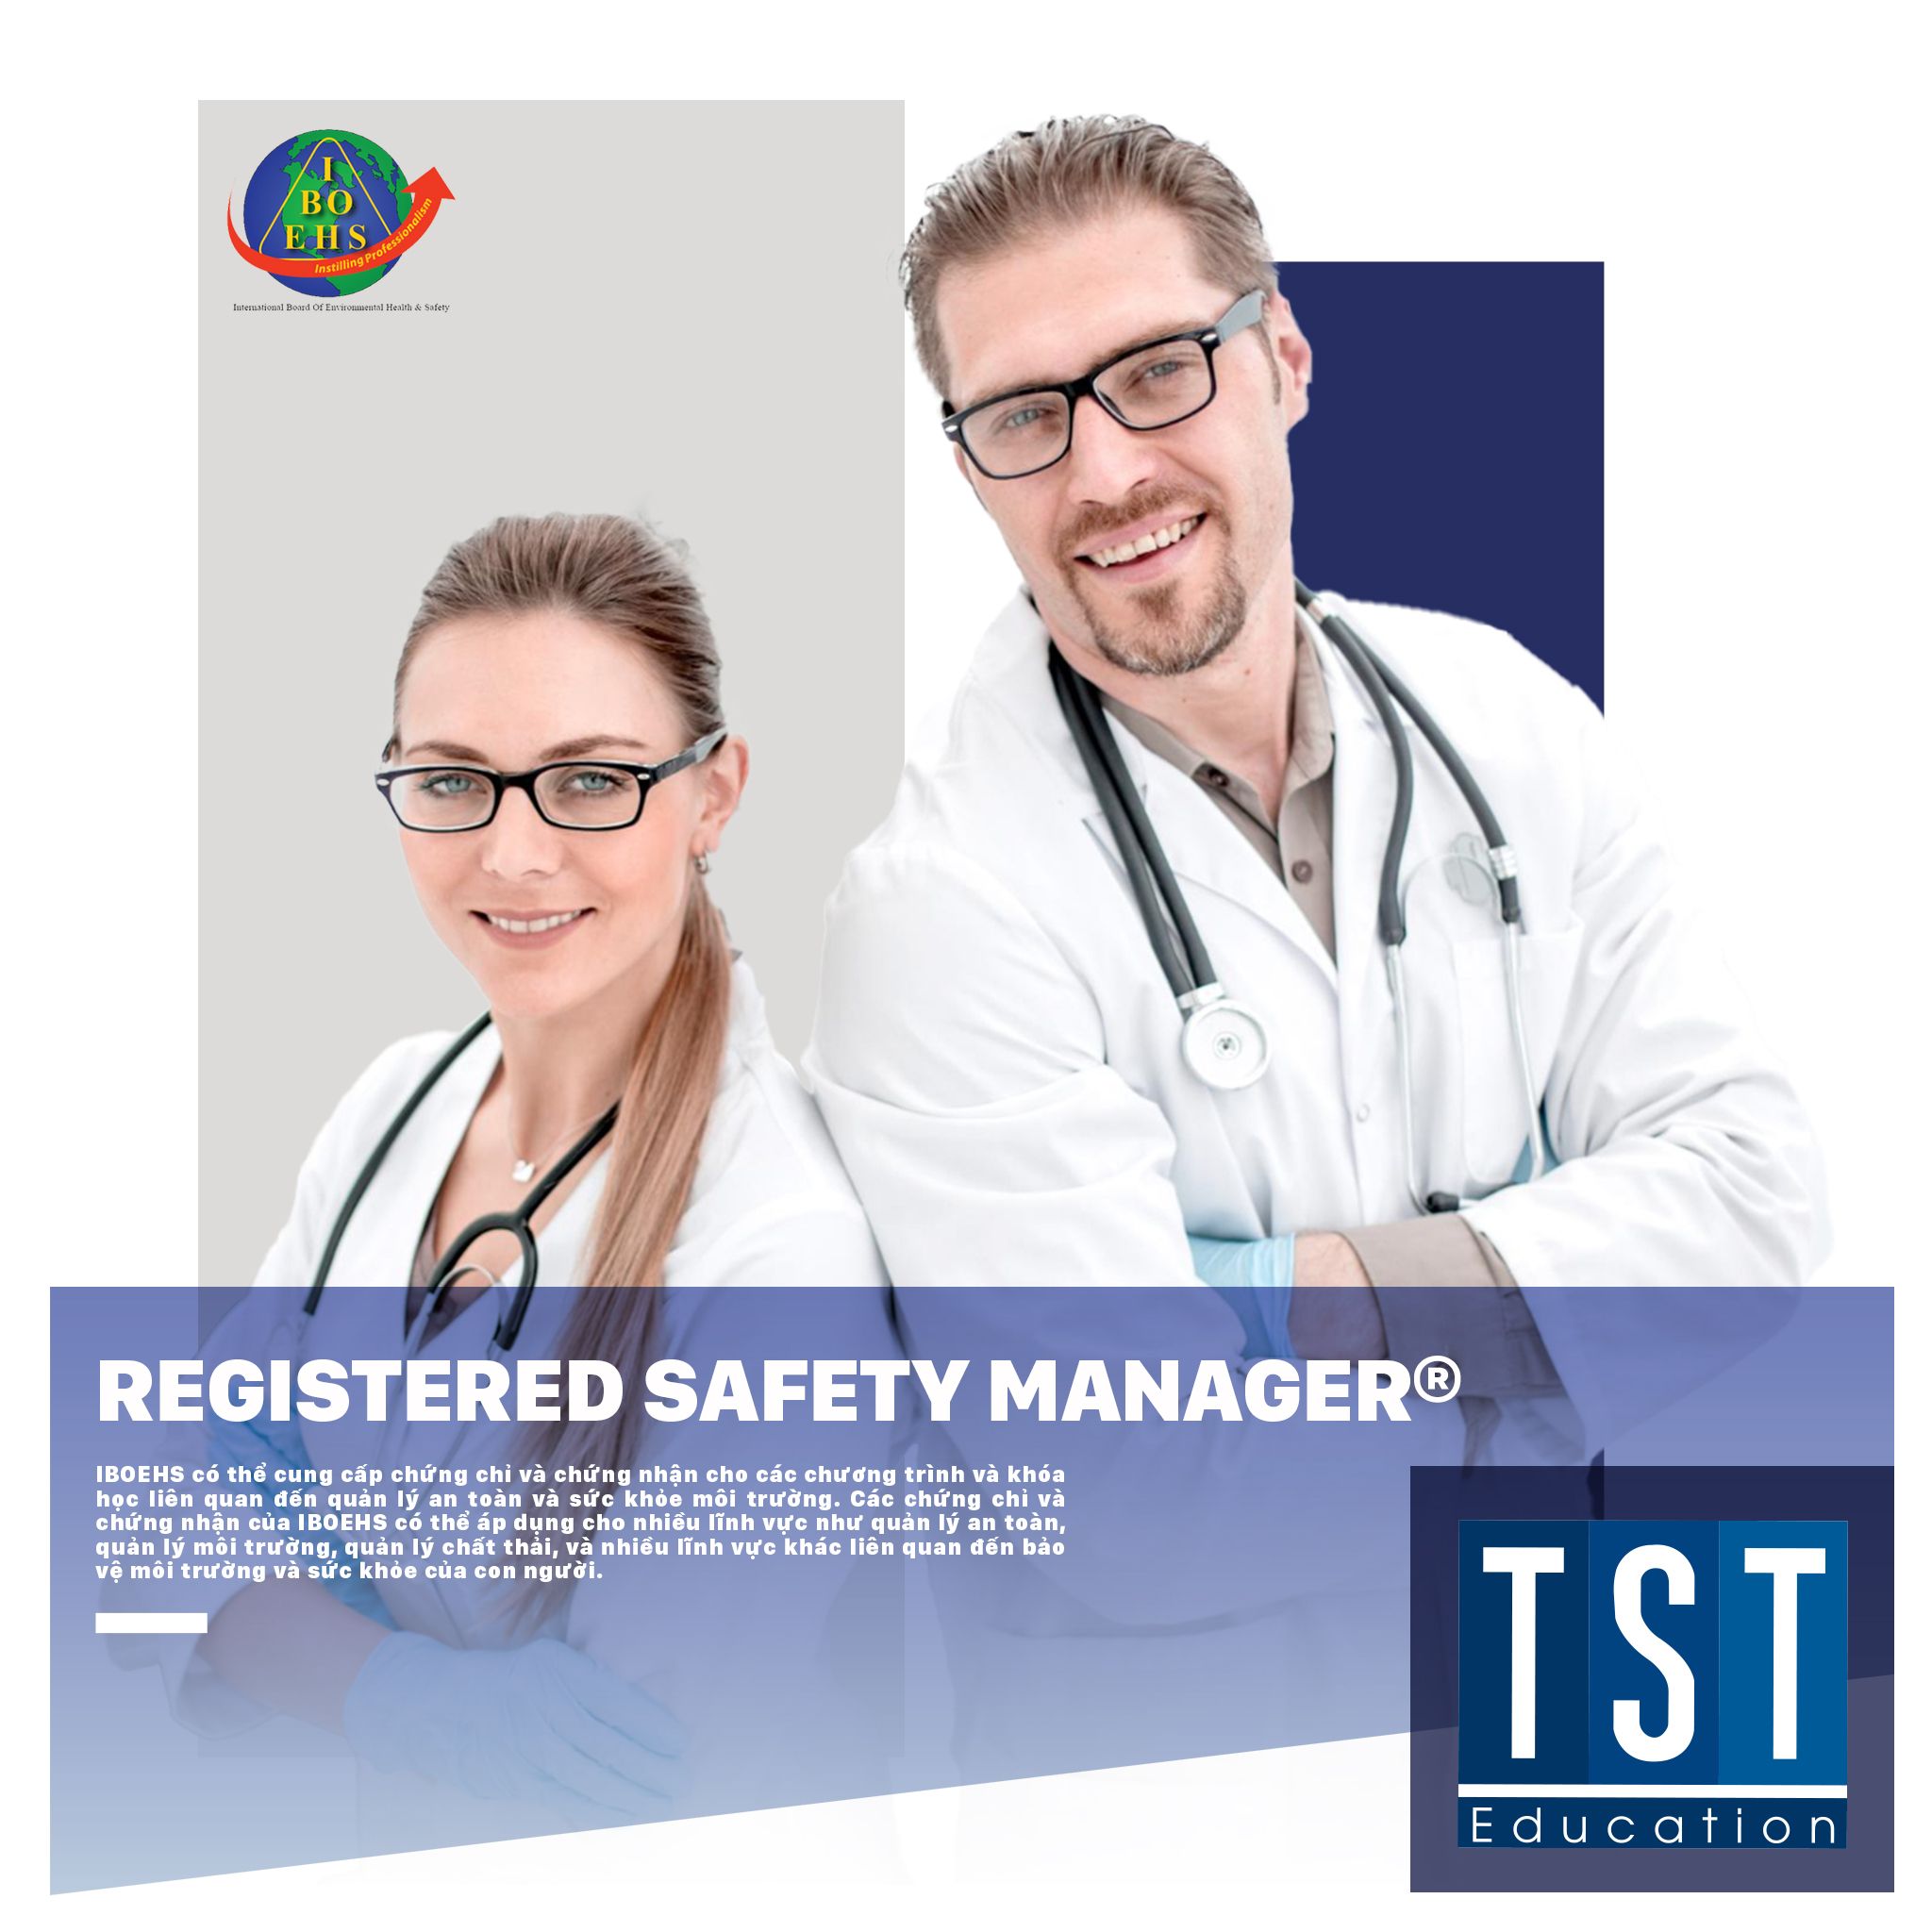  REGISTERED SAFETY MANAGER®(IBOEHS) 